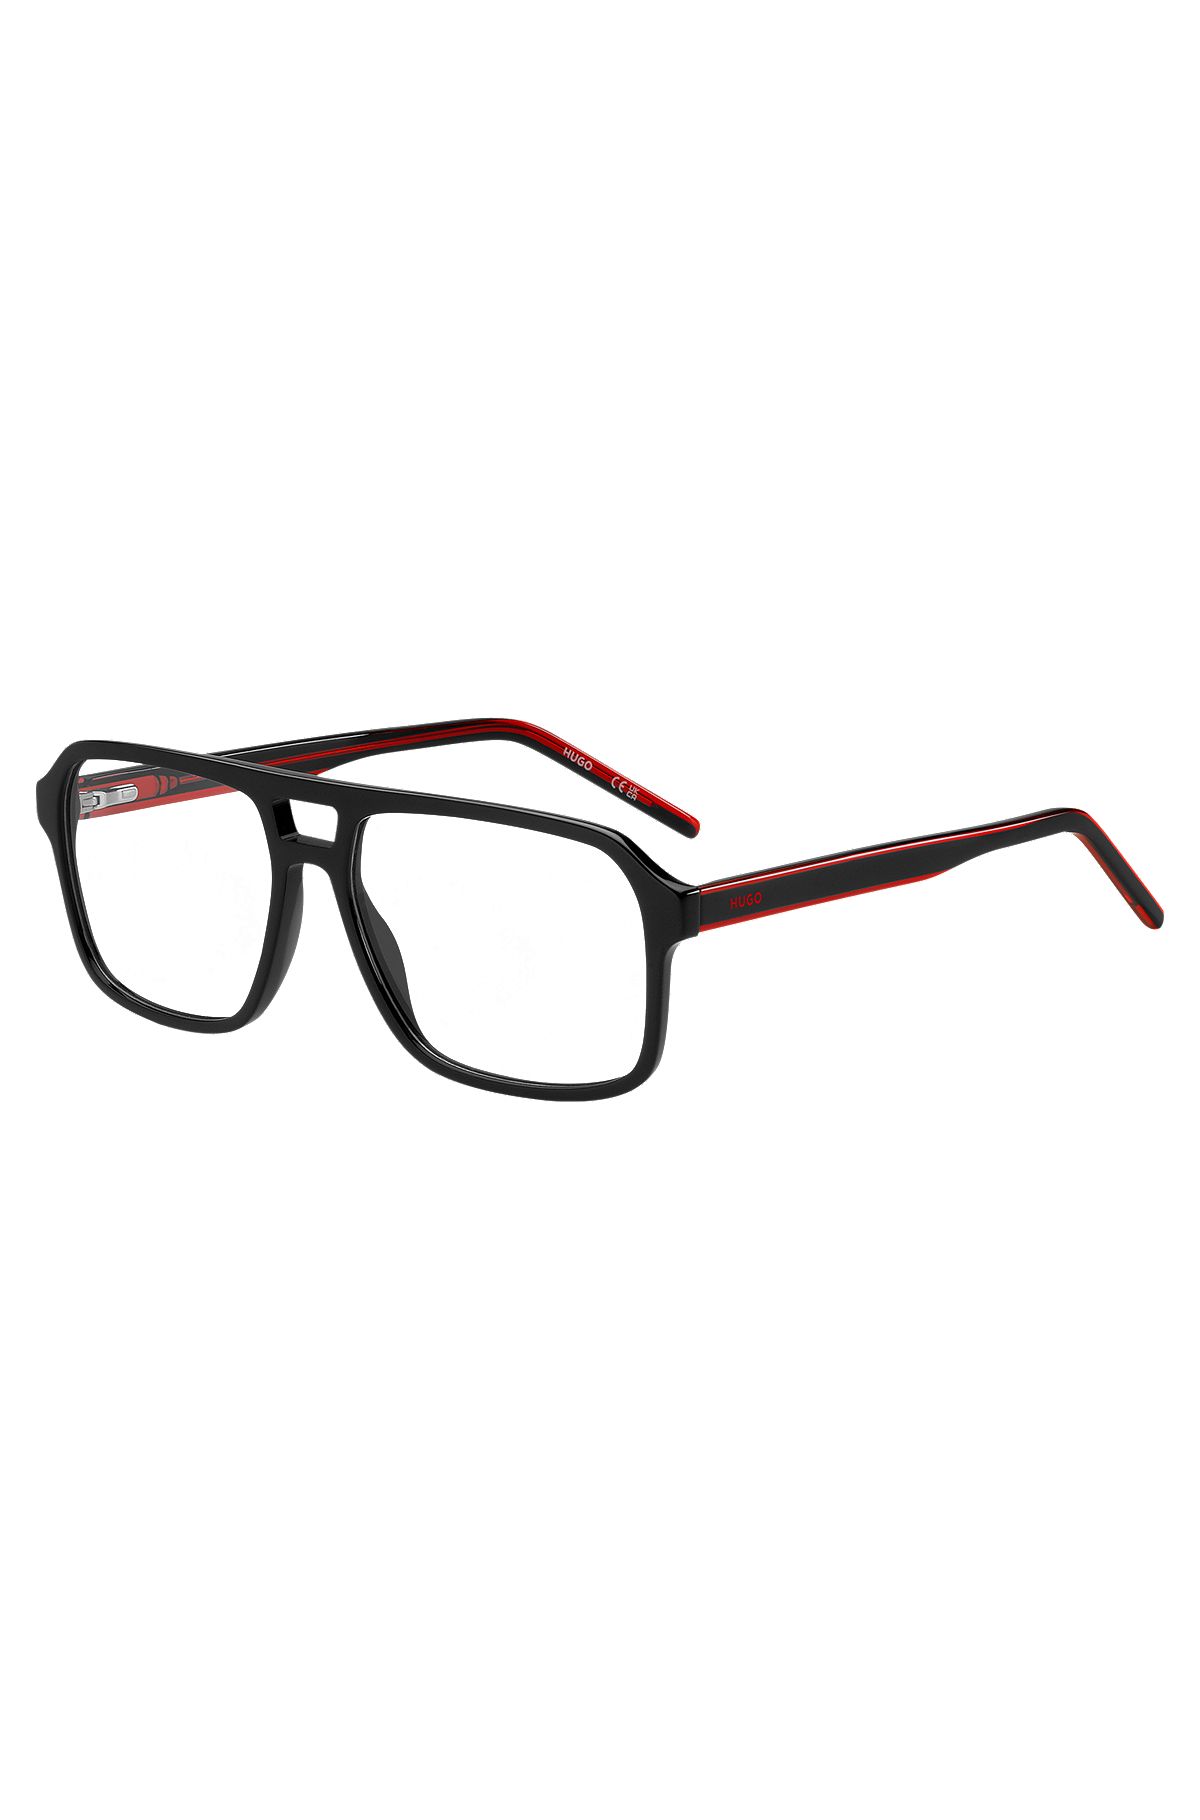 Double-bridge optical frames in black with red details, Black